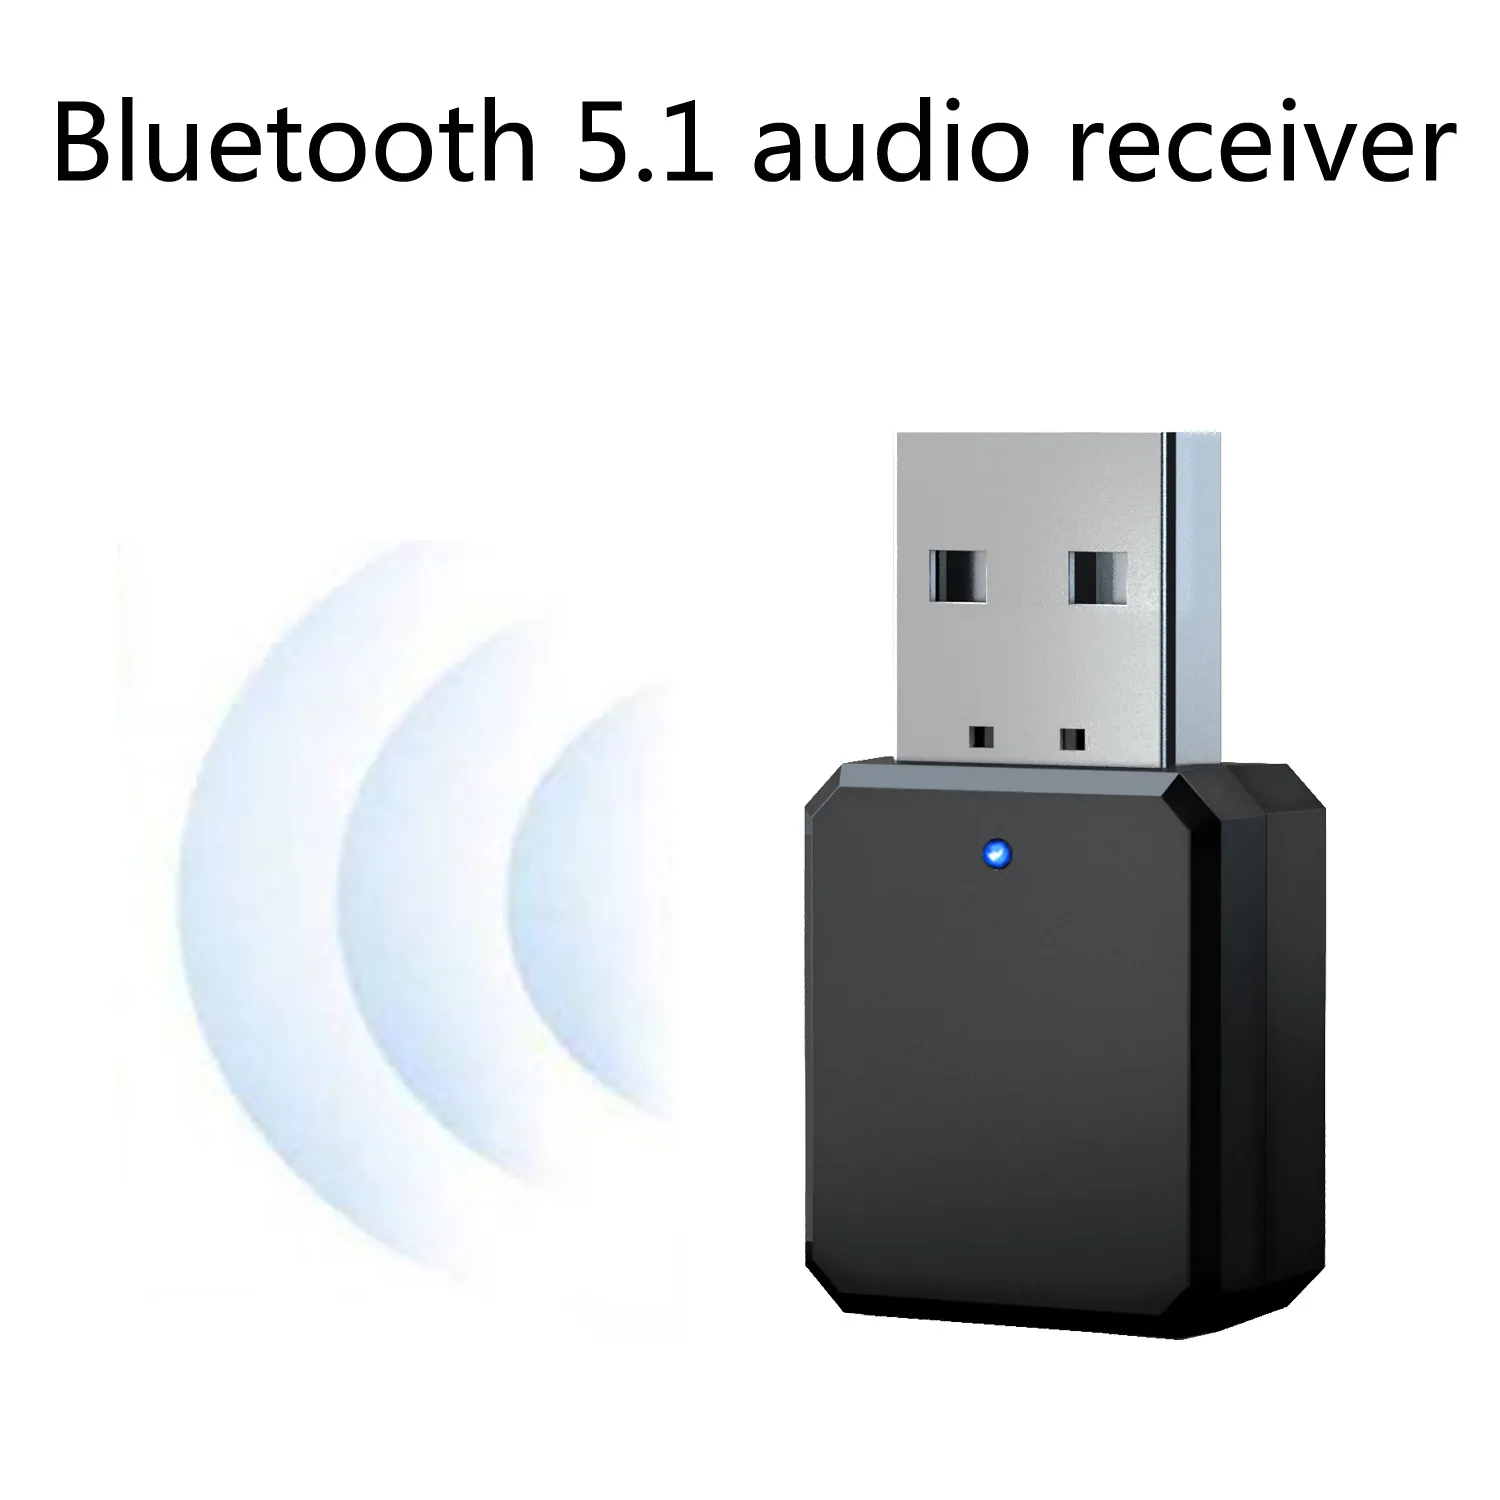 3.5mm AUX To USB Wireless Bluetooth Audio Stereo Car Music Receiver Adapter NEW 